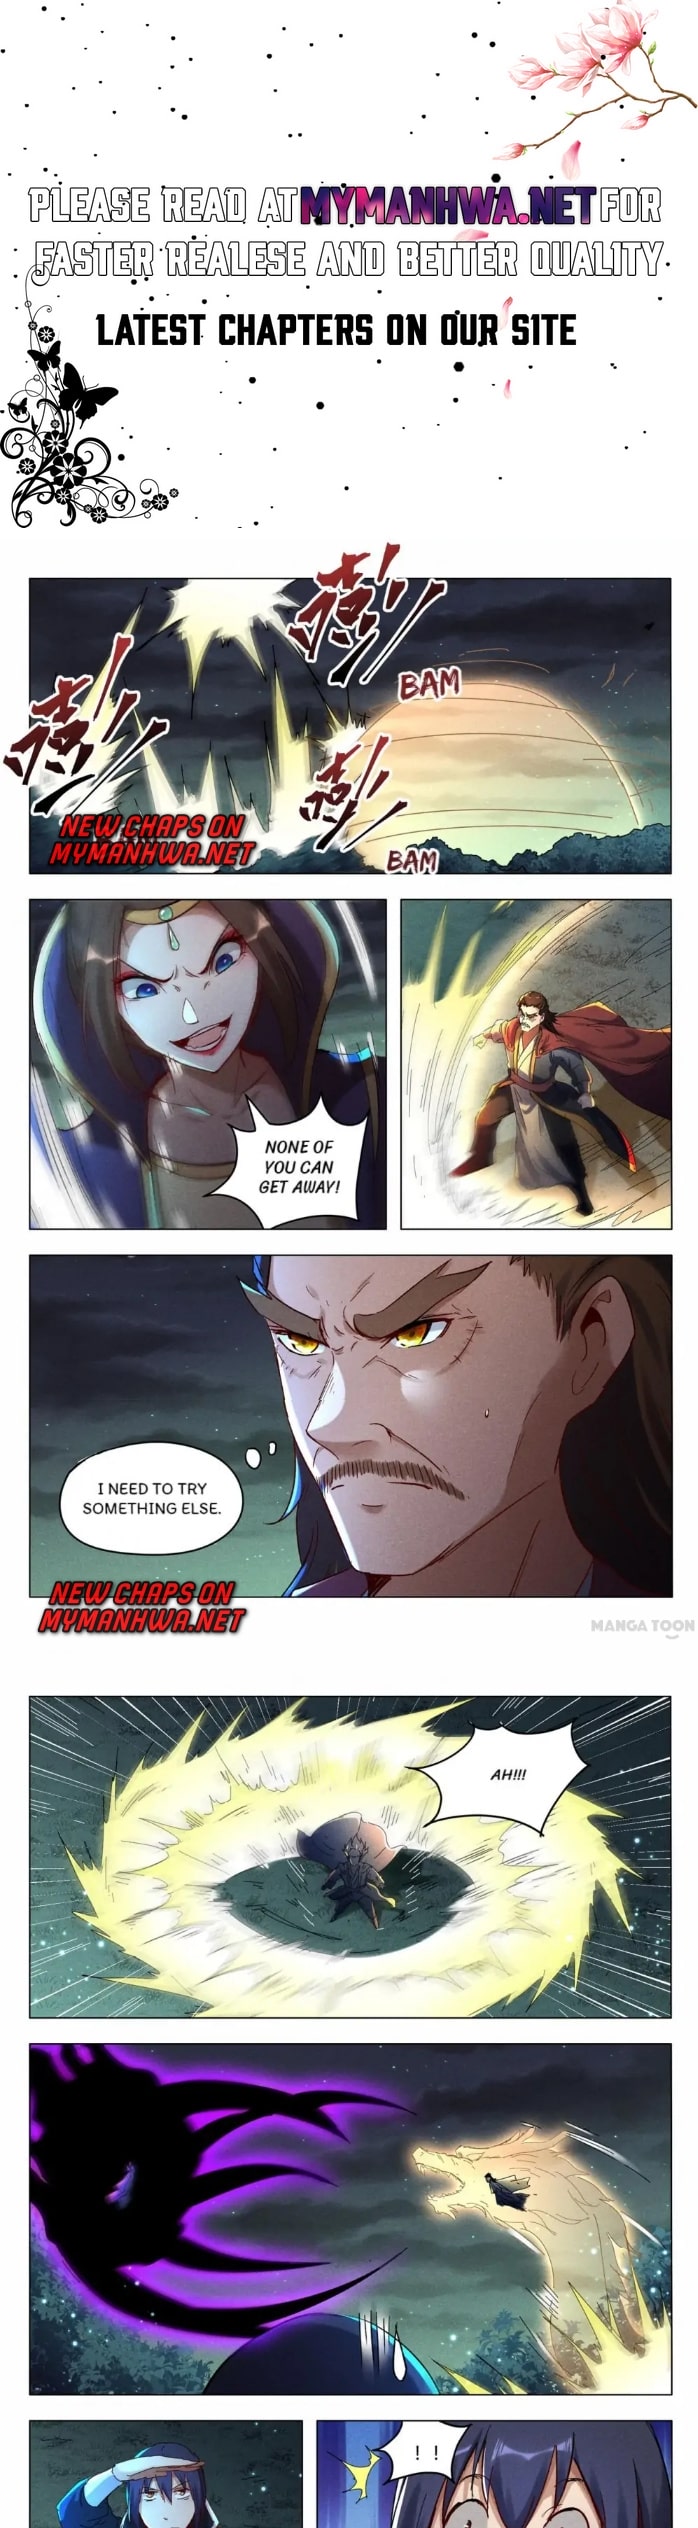 Master Of Legendary Realms Chapter 436